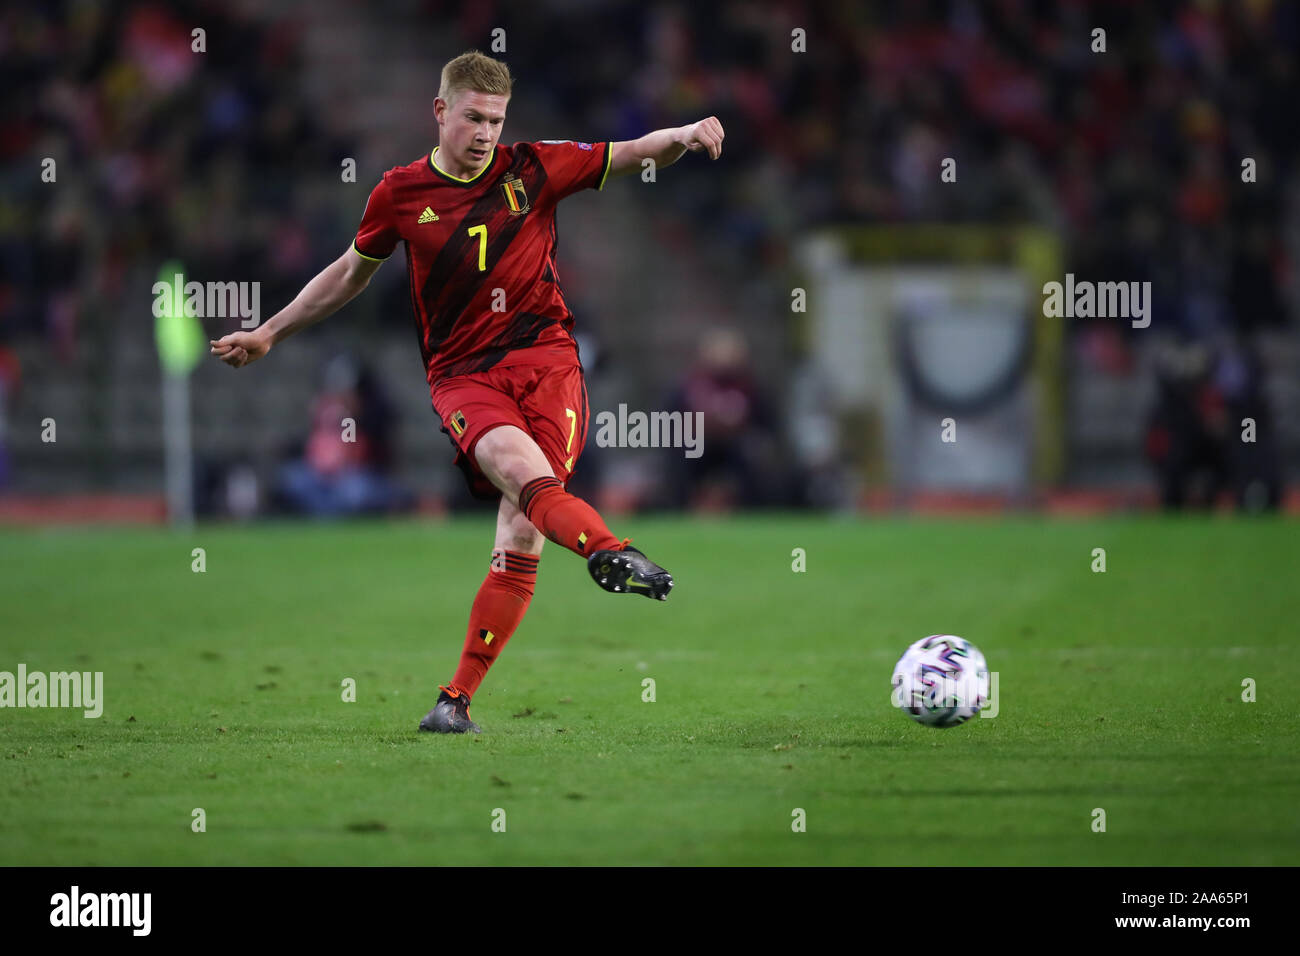 Brussels, Belgium. 19th Nov, 2019. Kevin De Bruyne of Belgium competes during a UEFA Euro 2020 group I qualifying match between Belgium and Cyprus in Brussels, Belgium, Nov. 19, 2019. Credit: Zhang Cheng/Xinhua/Alamy Live News Stock Photo